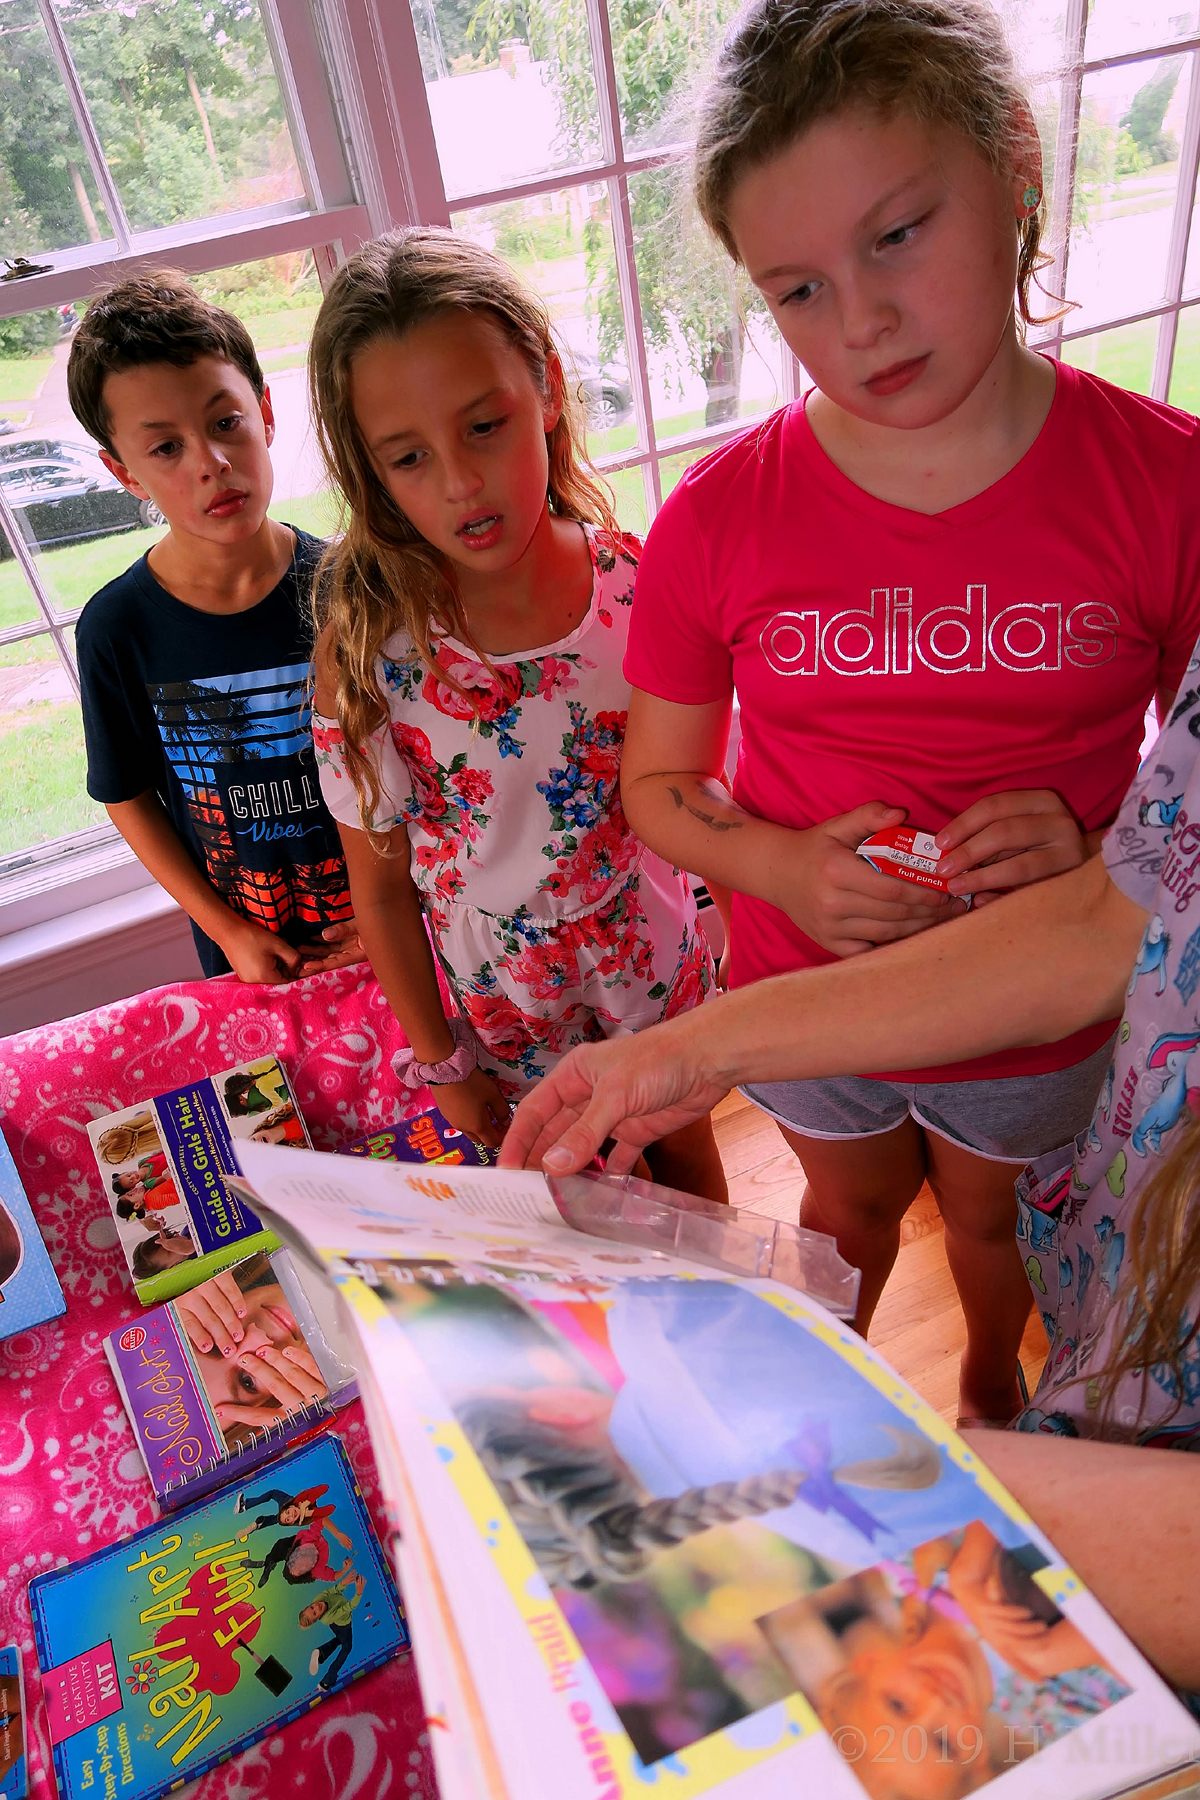 A Kids Spa Birthday Party For Siena In September 2018 In New Jersey Gallery 1 